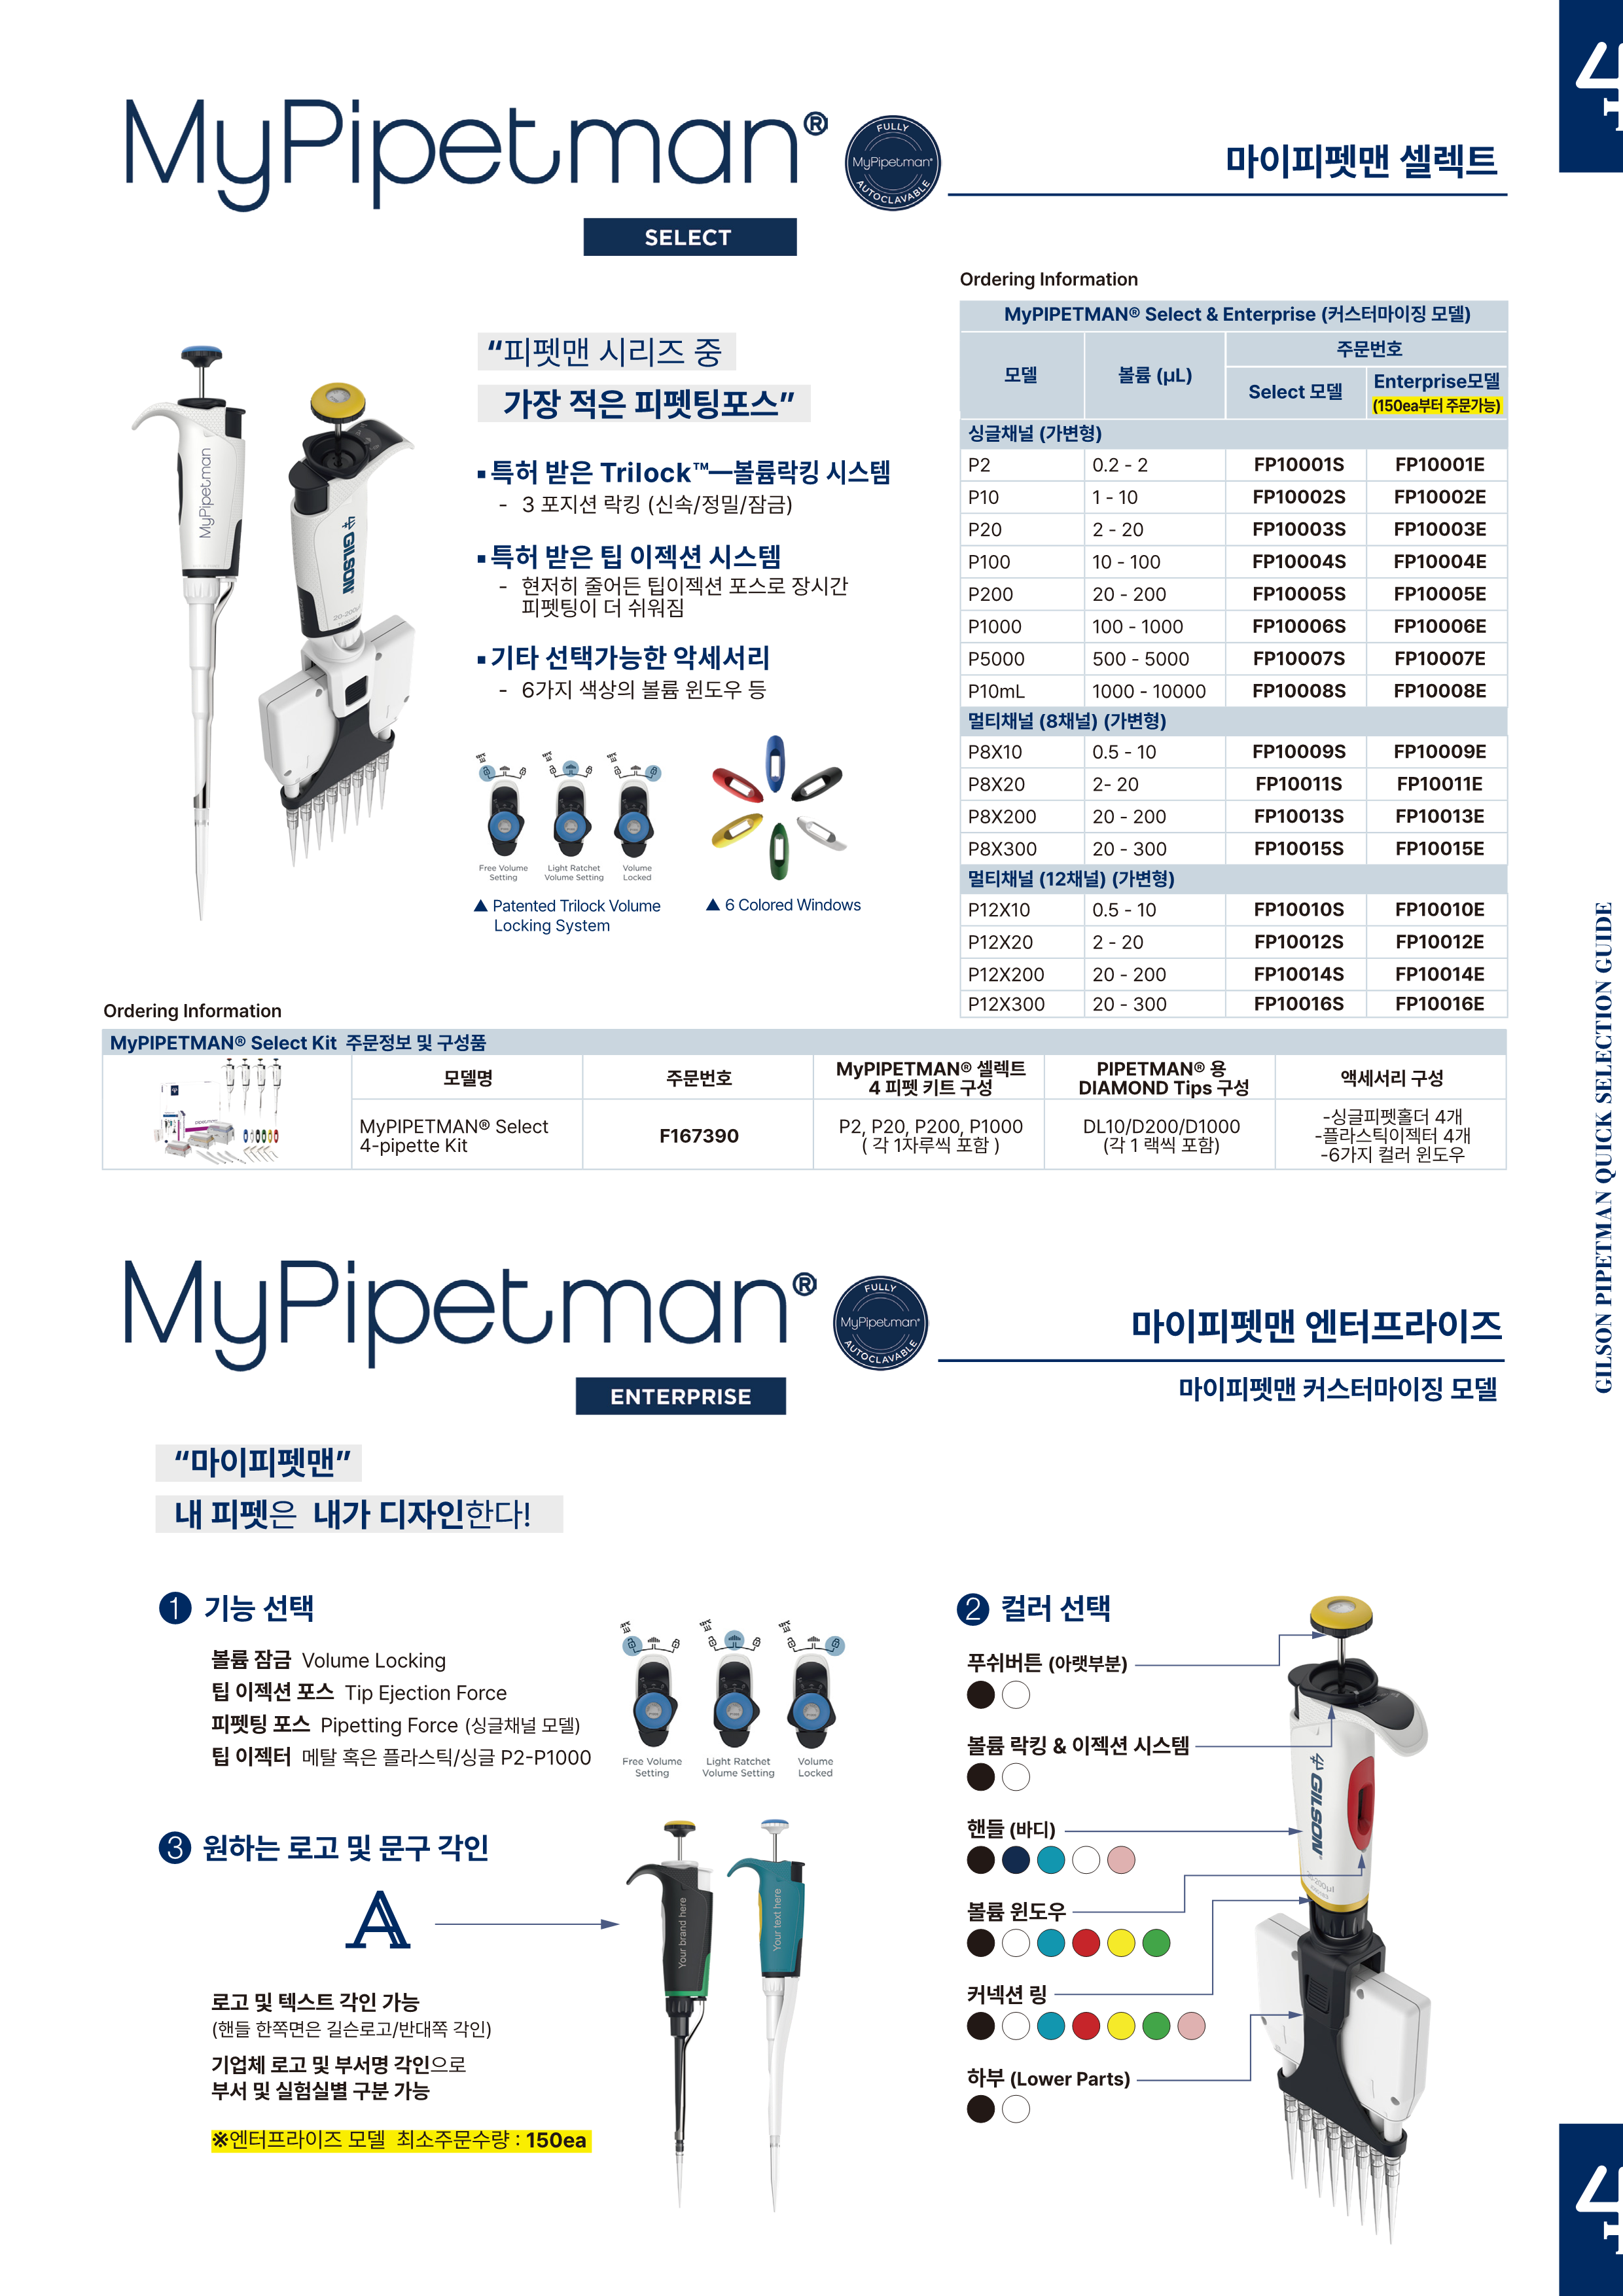 Gilson Pipetman Quick Selection Guide_2.png